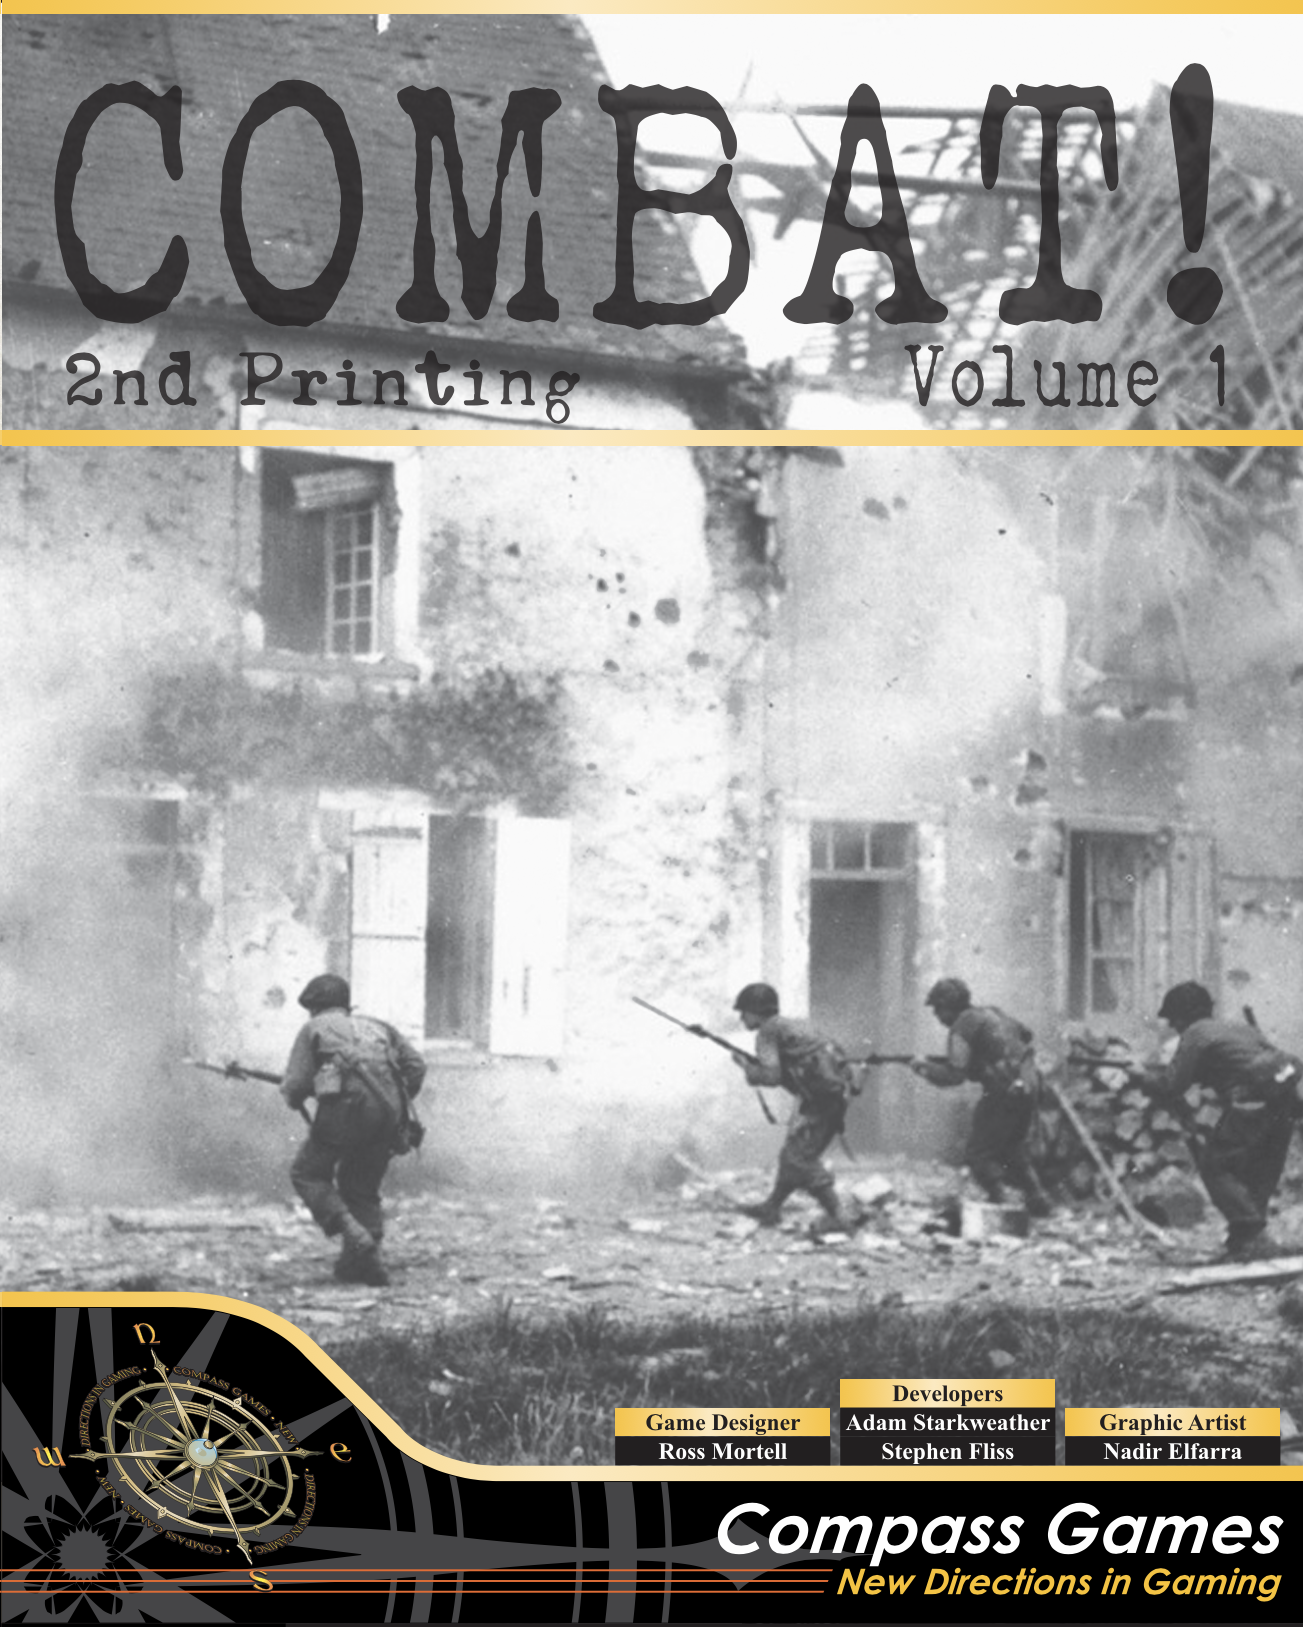 Combat! Volume 1 – 2nd Printing front cover, war game